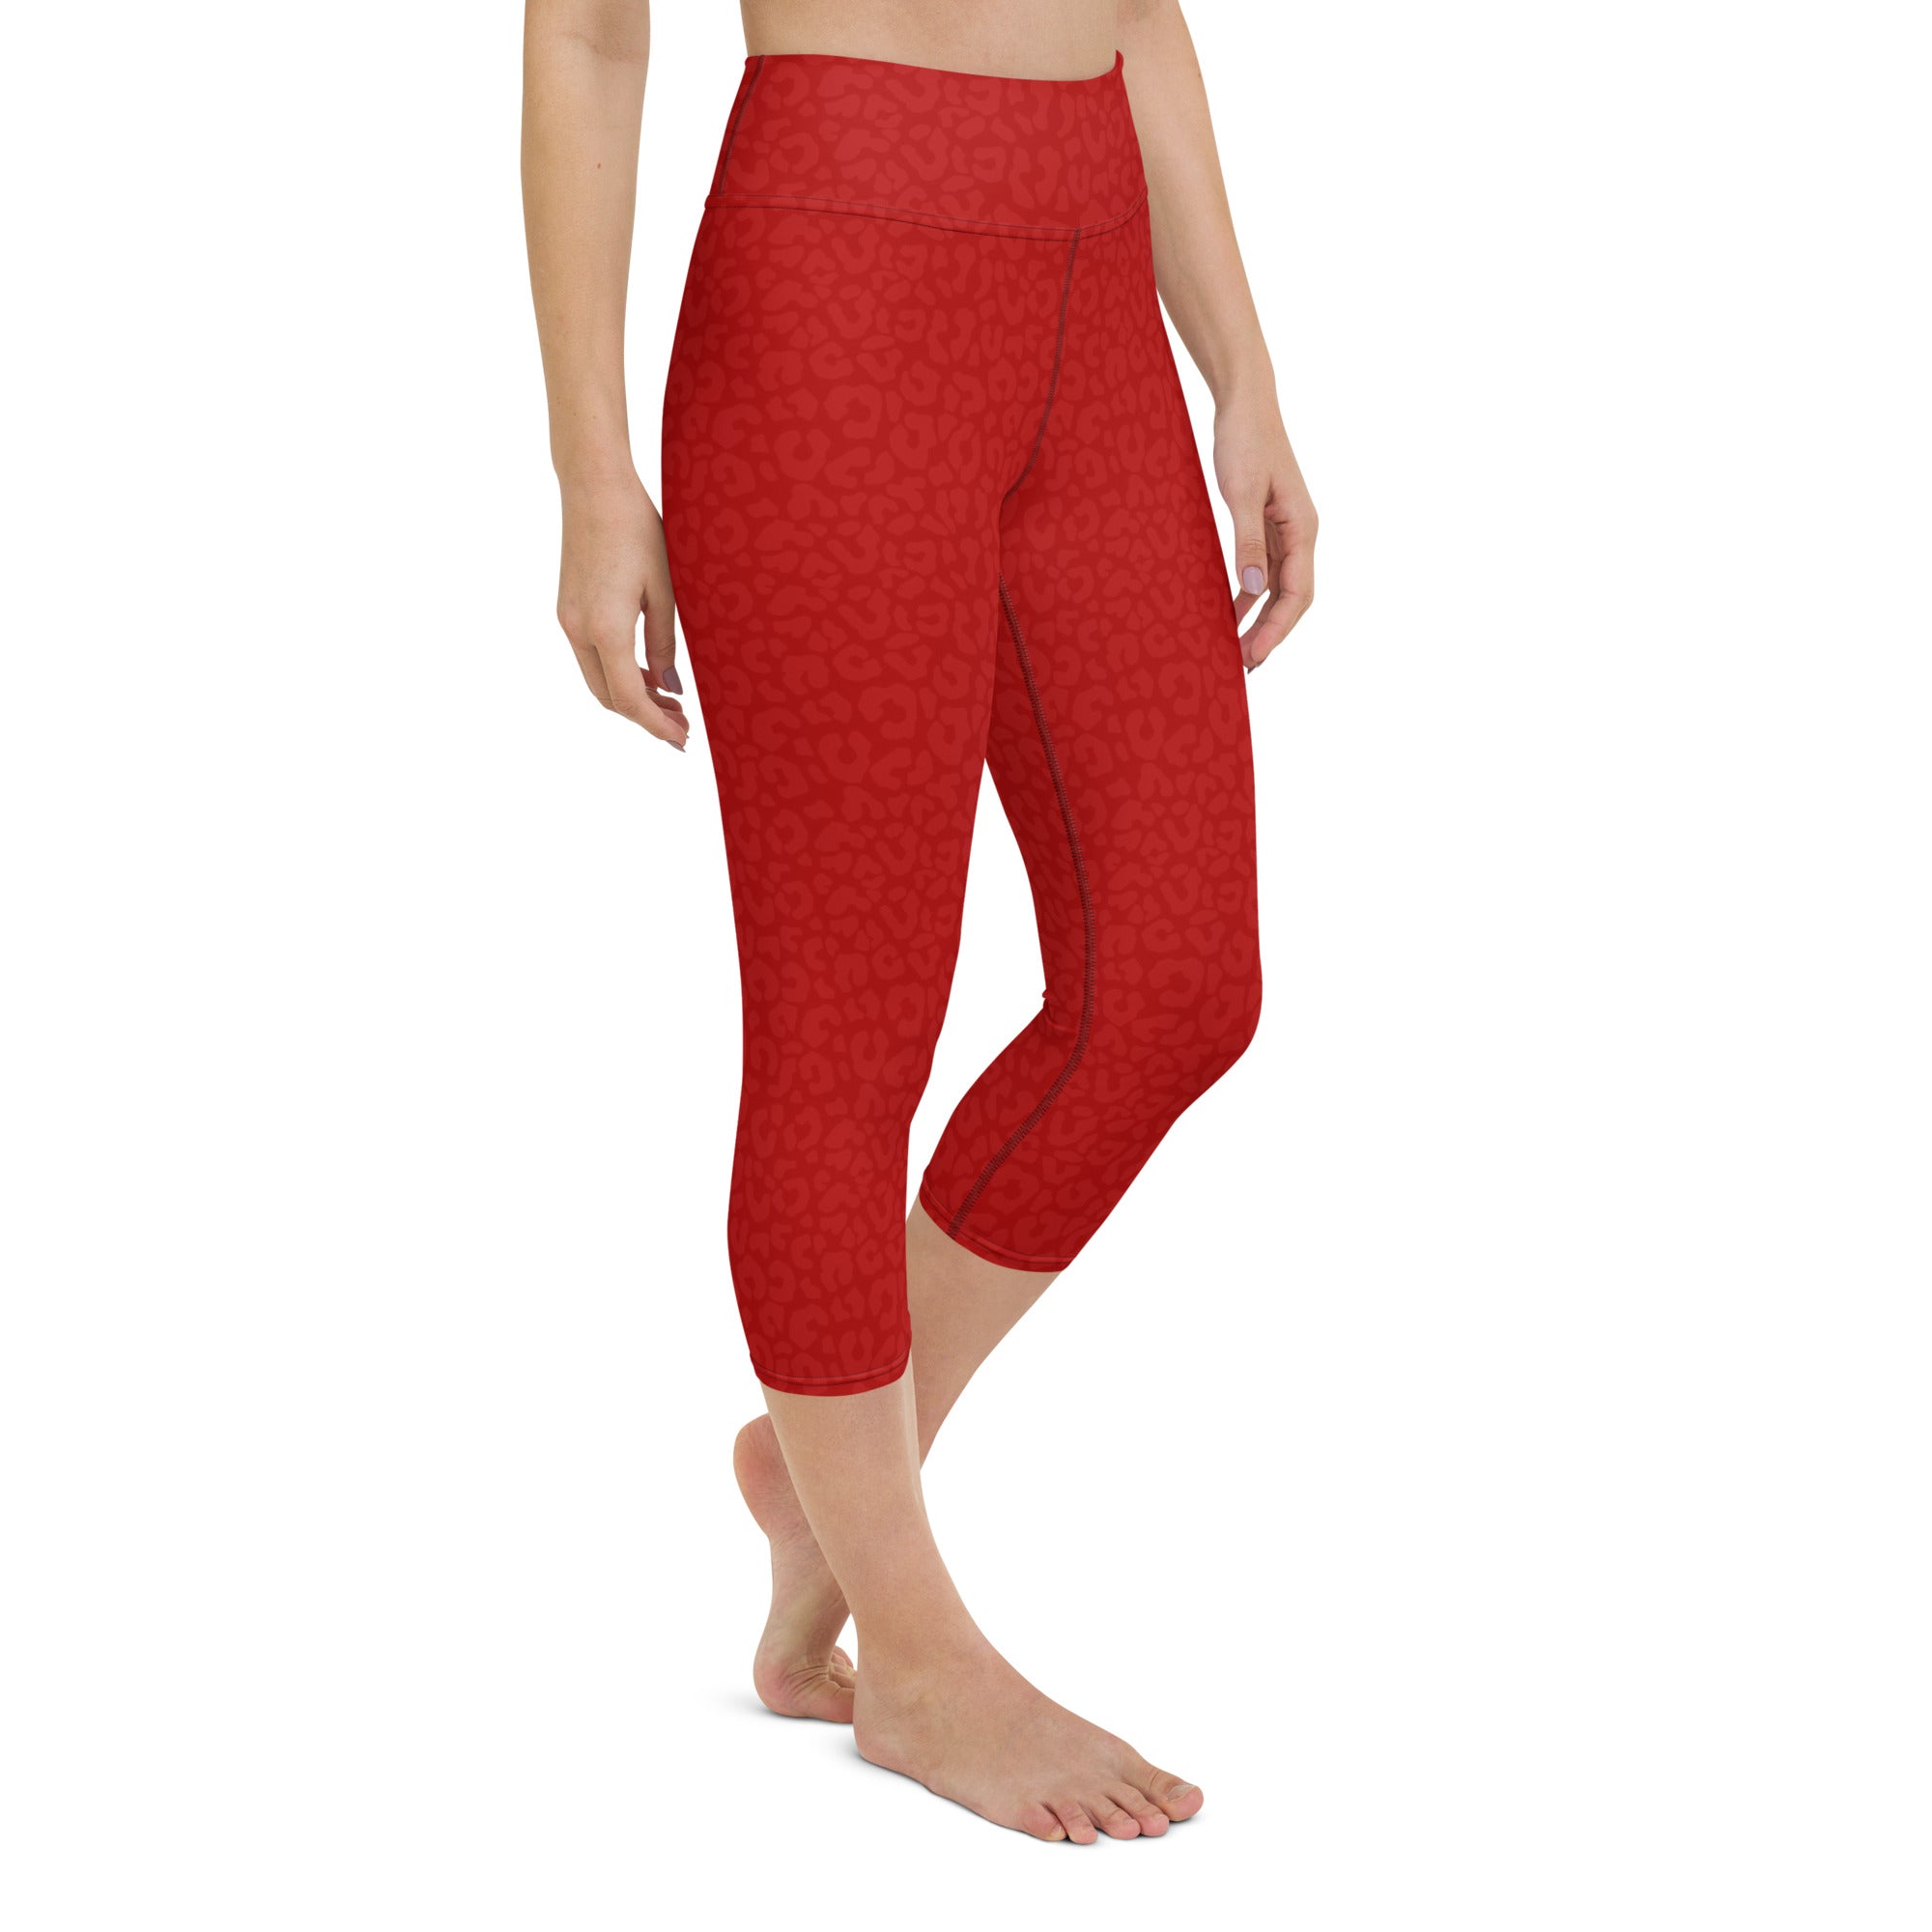 Not Your Babe Yoga Capris